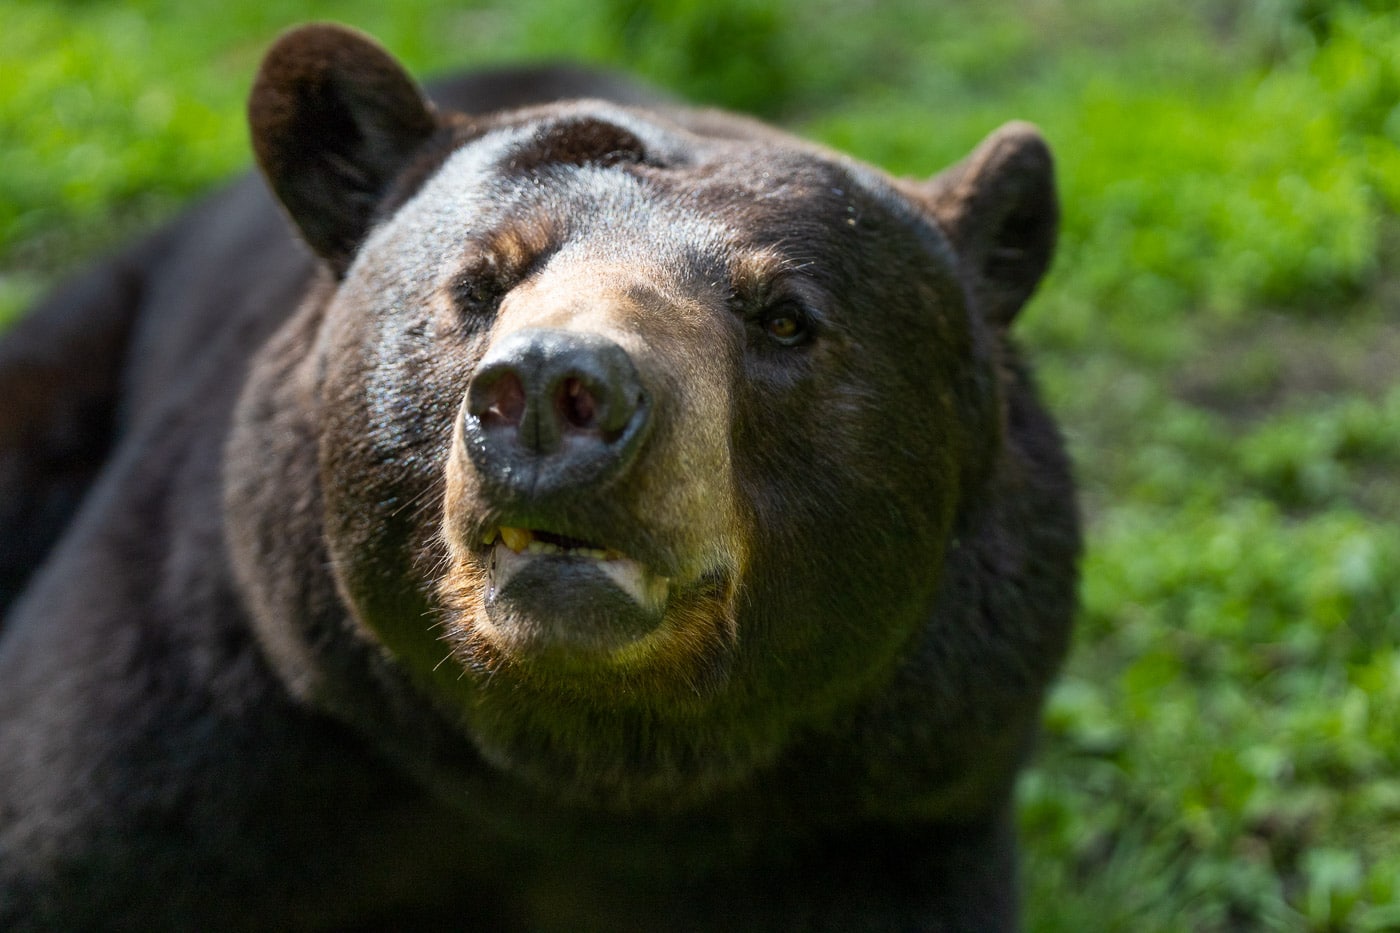 A close up of a black bear sniffing